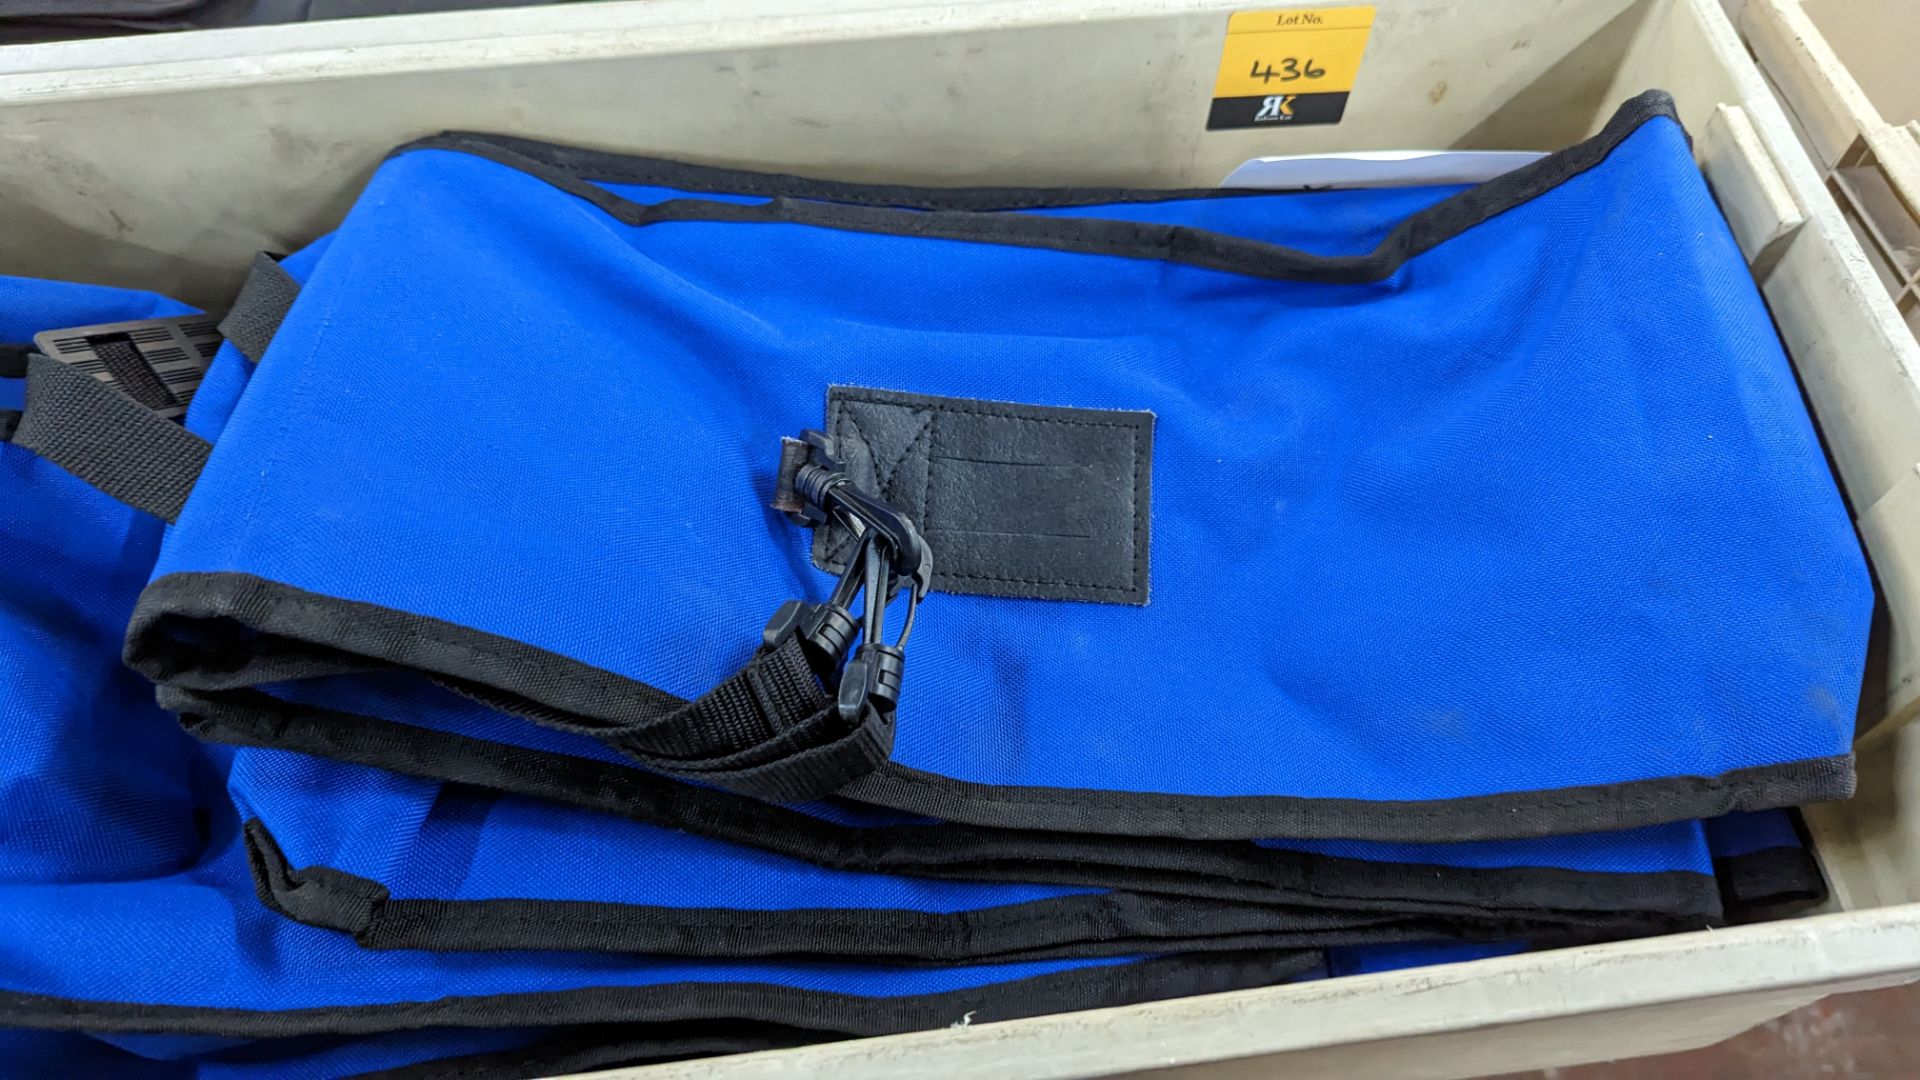 10 off soft carry cases, presumed to be used with electrical testing equipment and similar